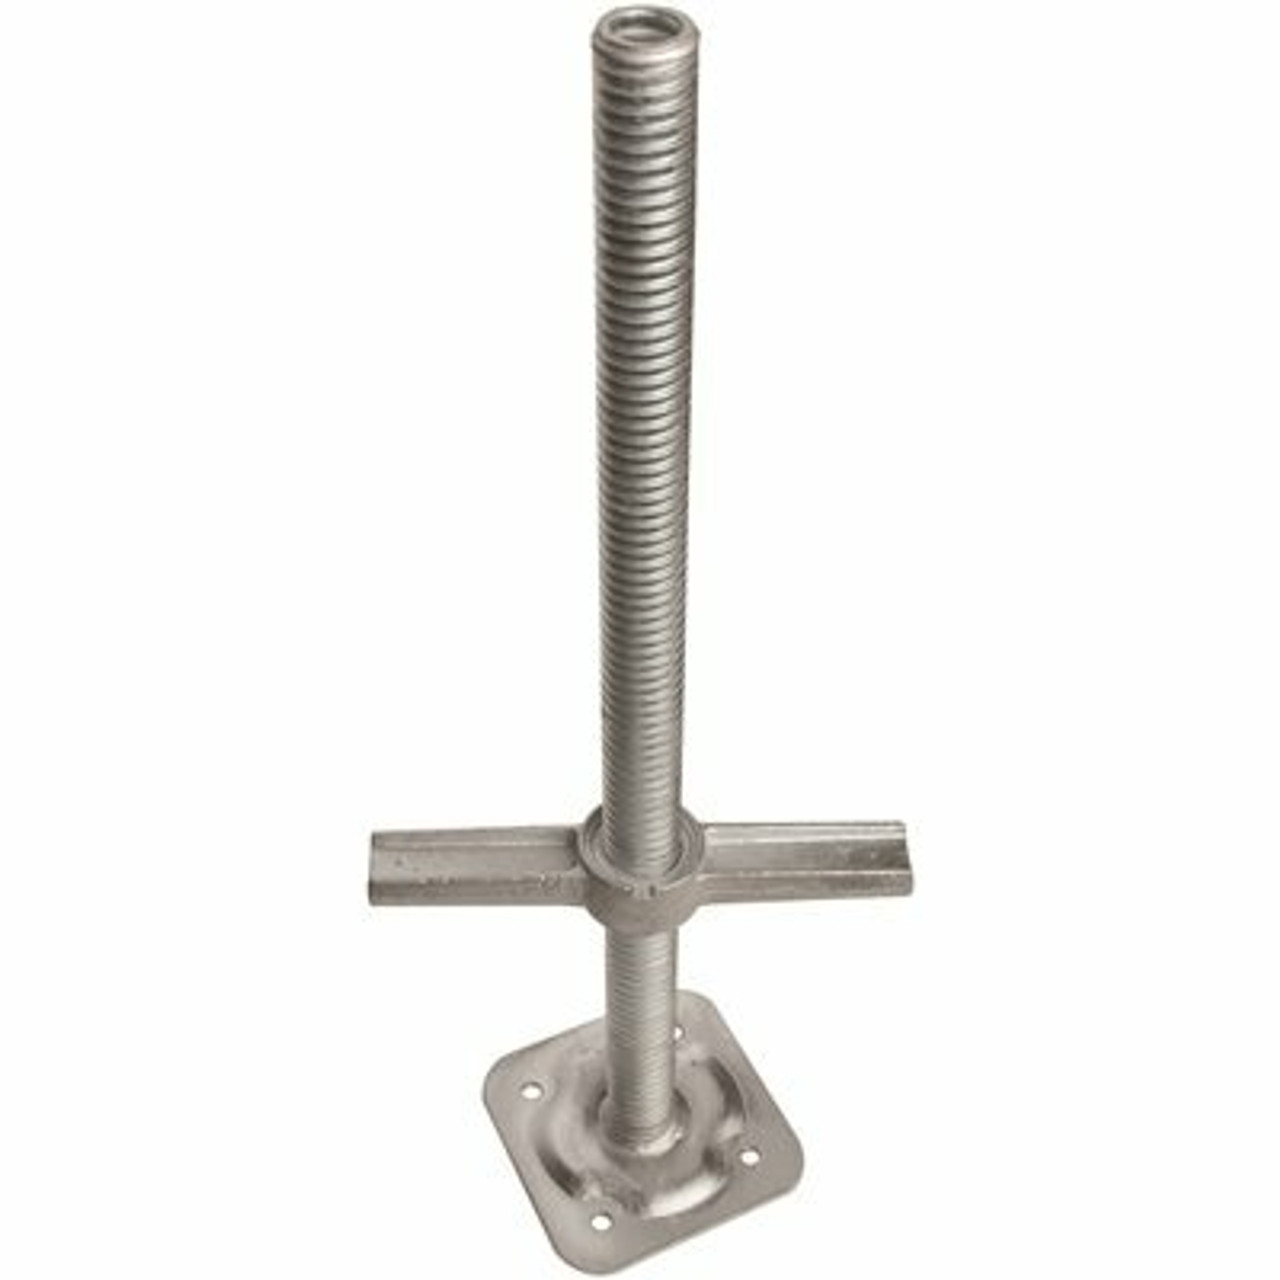 Metaltech 24 In. Adjustable Leveling Jack In Galvanized Steel With Base Plate For Scaffolding Frames